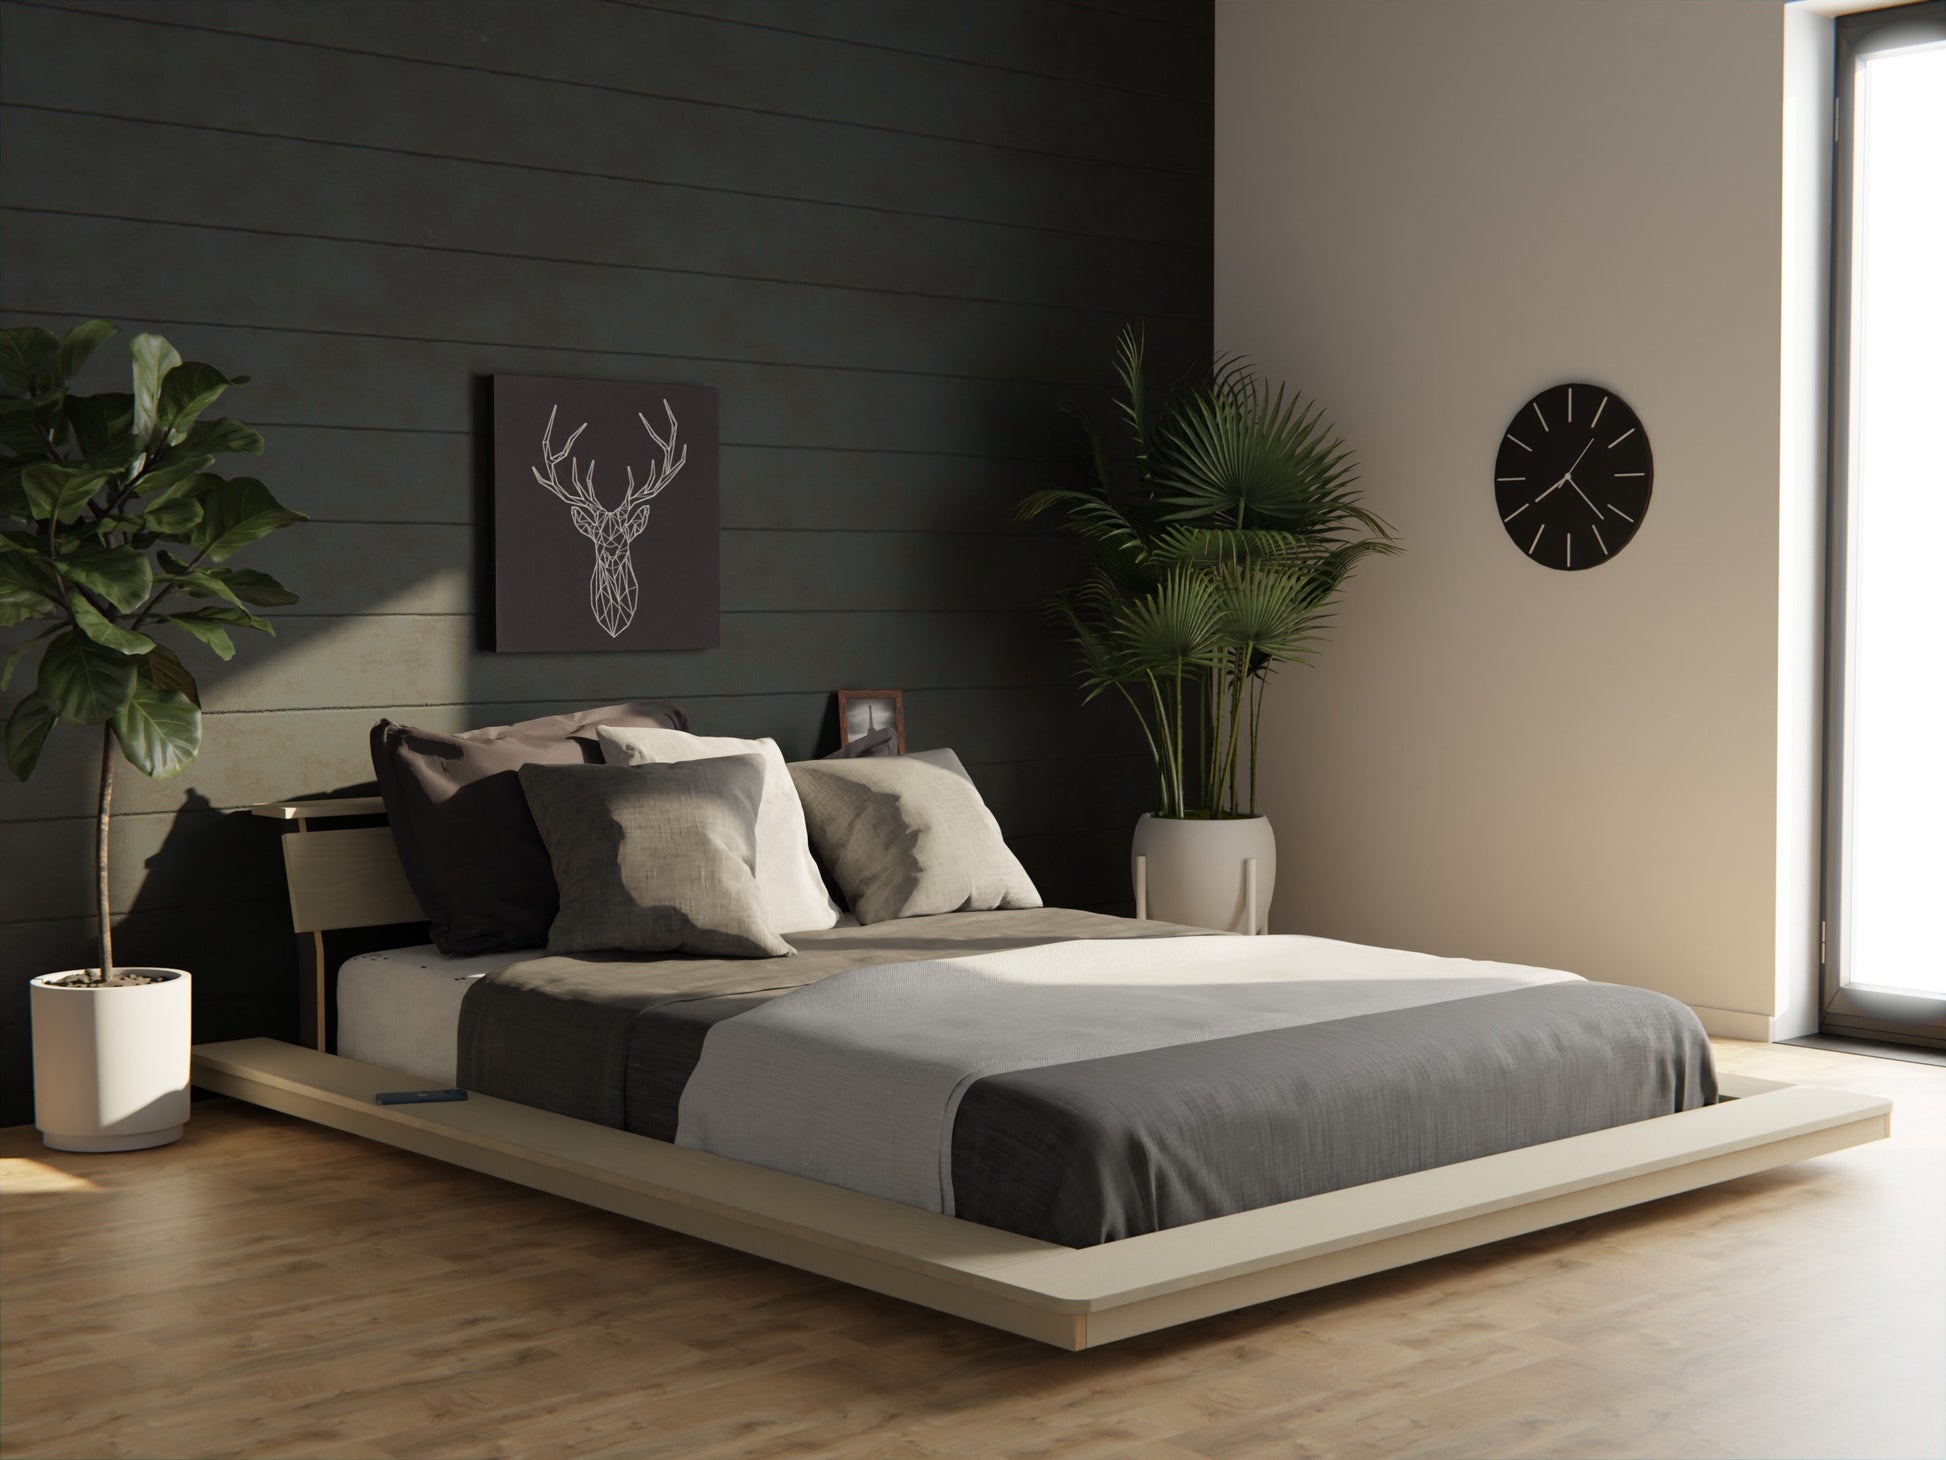 Elevate your sleep space with our solid wood low profile bed. Featuring a floating design provides a cozy and stylish option for any size bed.